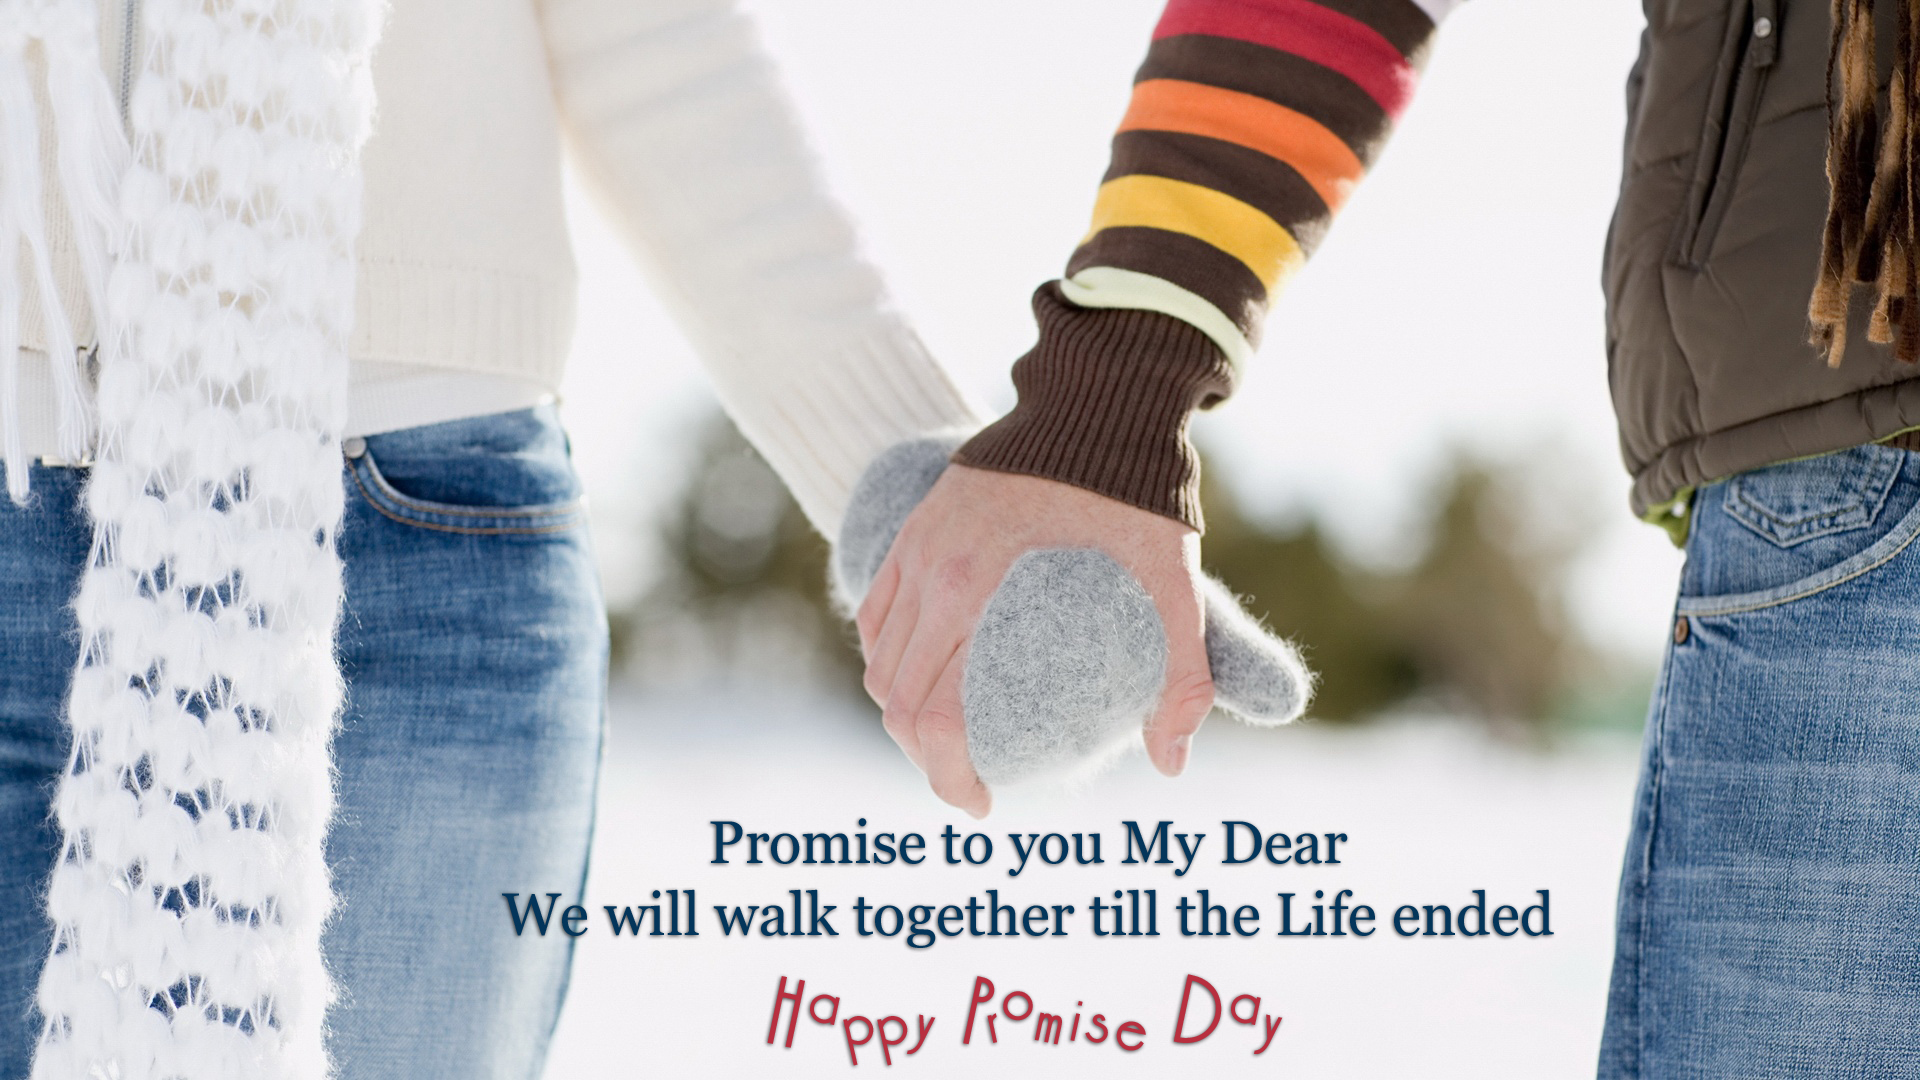 Happy Promise day Images Photos Whats App Status Wallpapers Collection